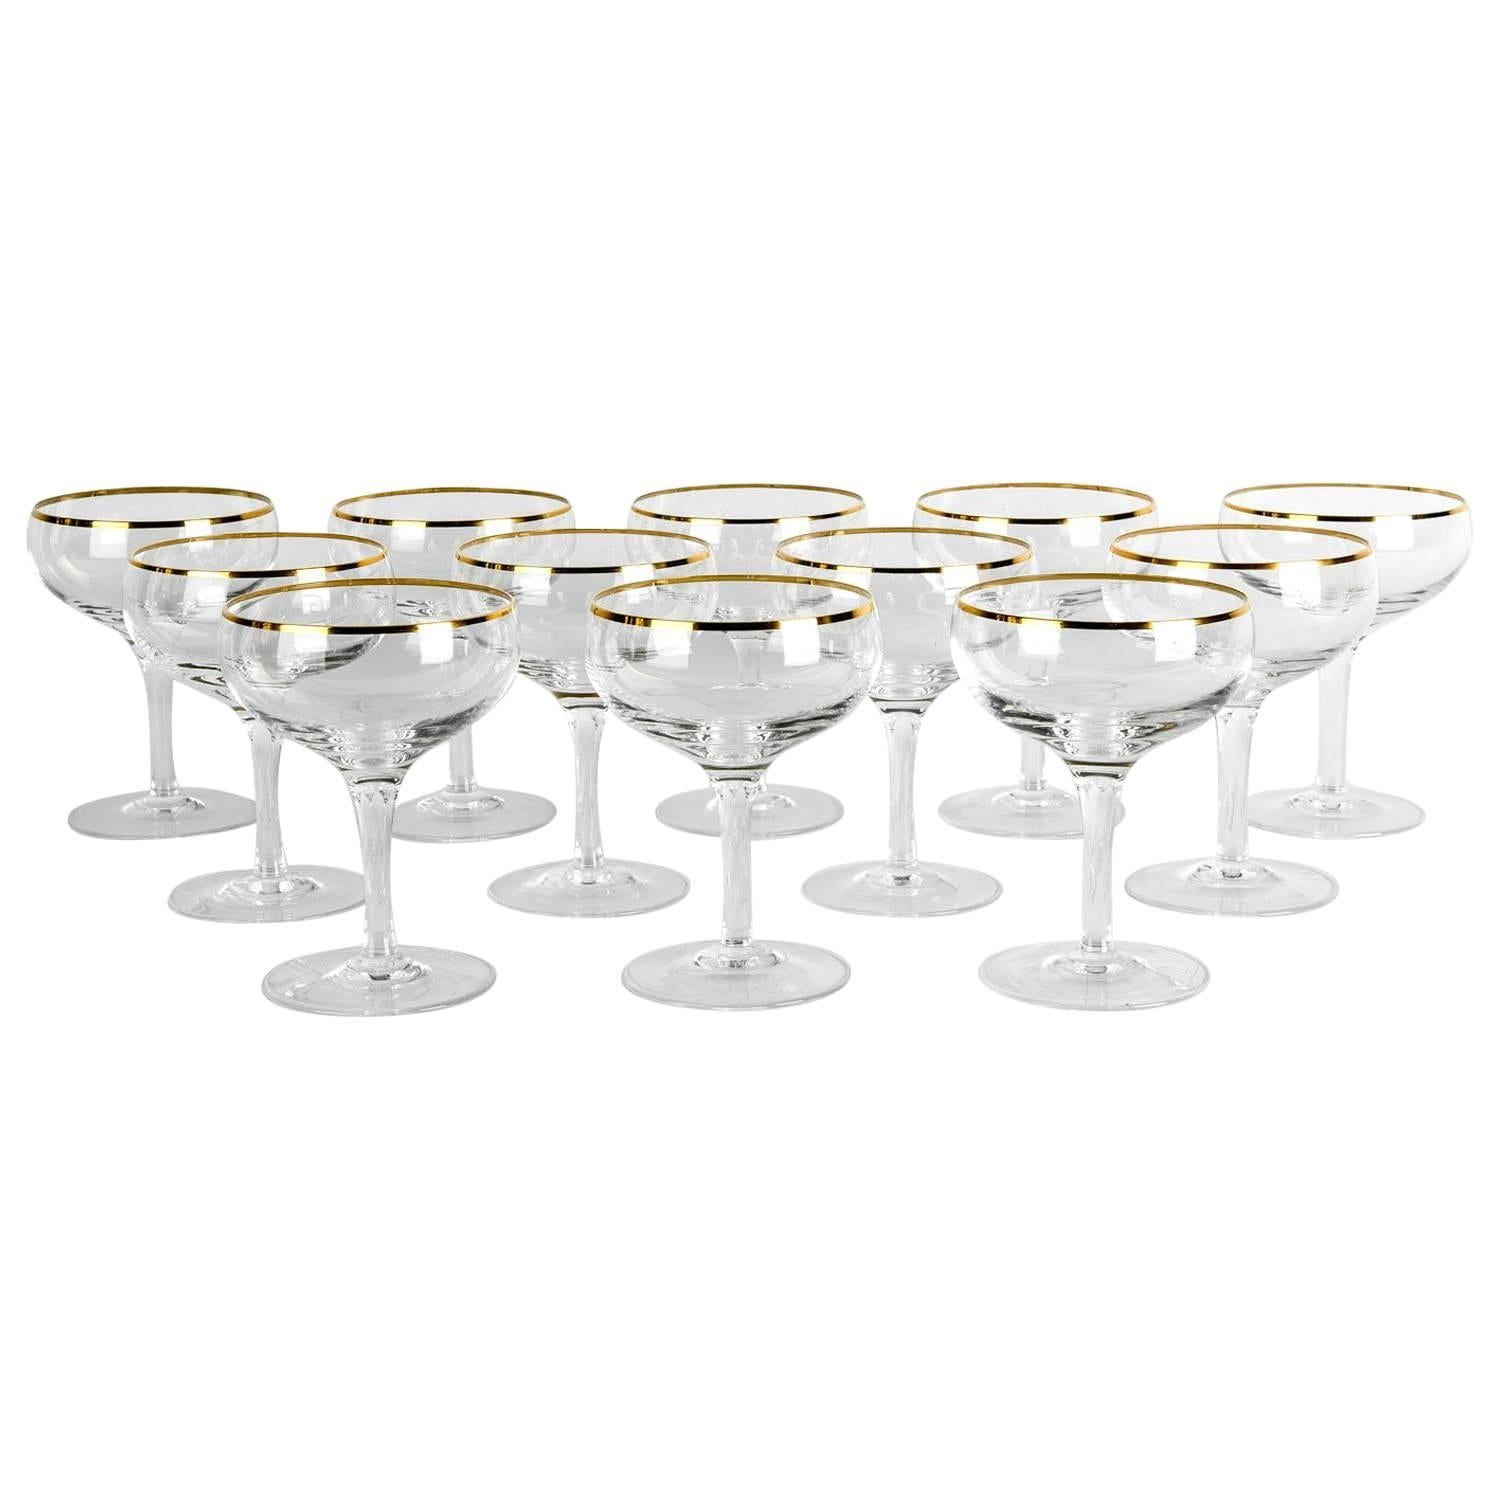 Vintage Crystal Champagne Coupe Glassware Set 12 Pieces .